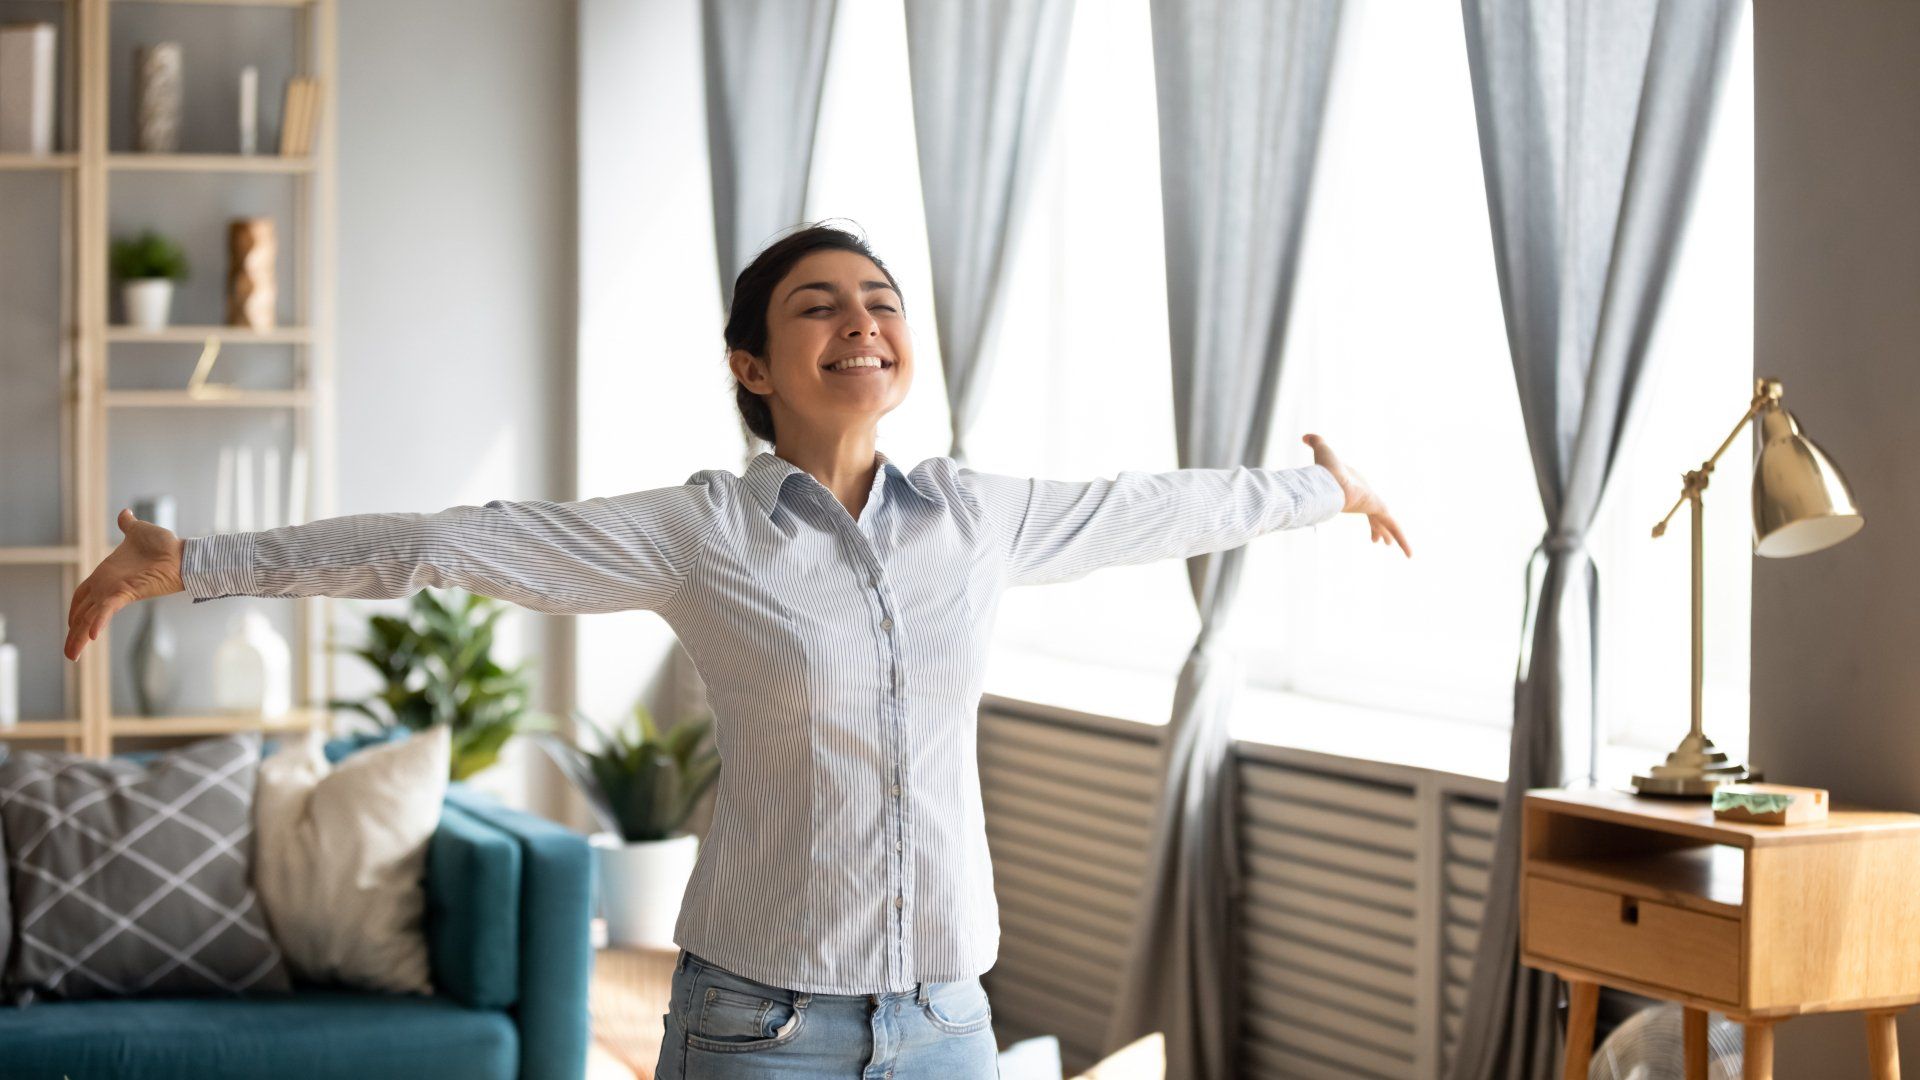 oung indian woman stand in modern living room interior with arms outstretched enjoy free lifestyle